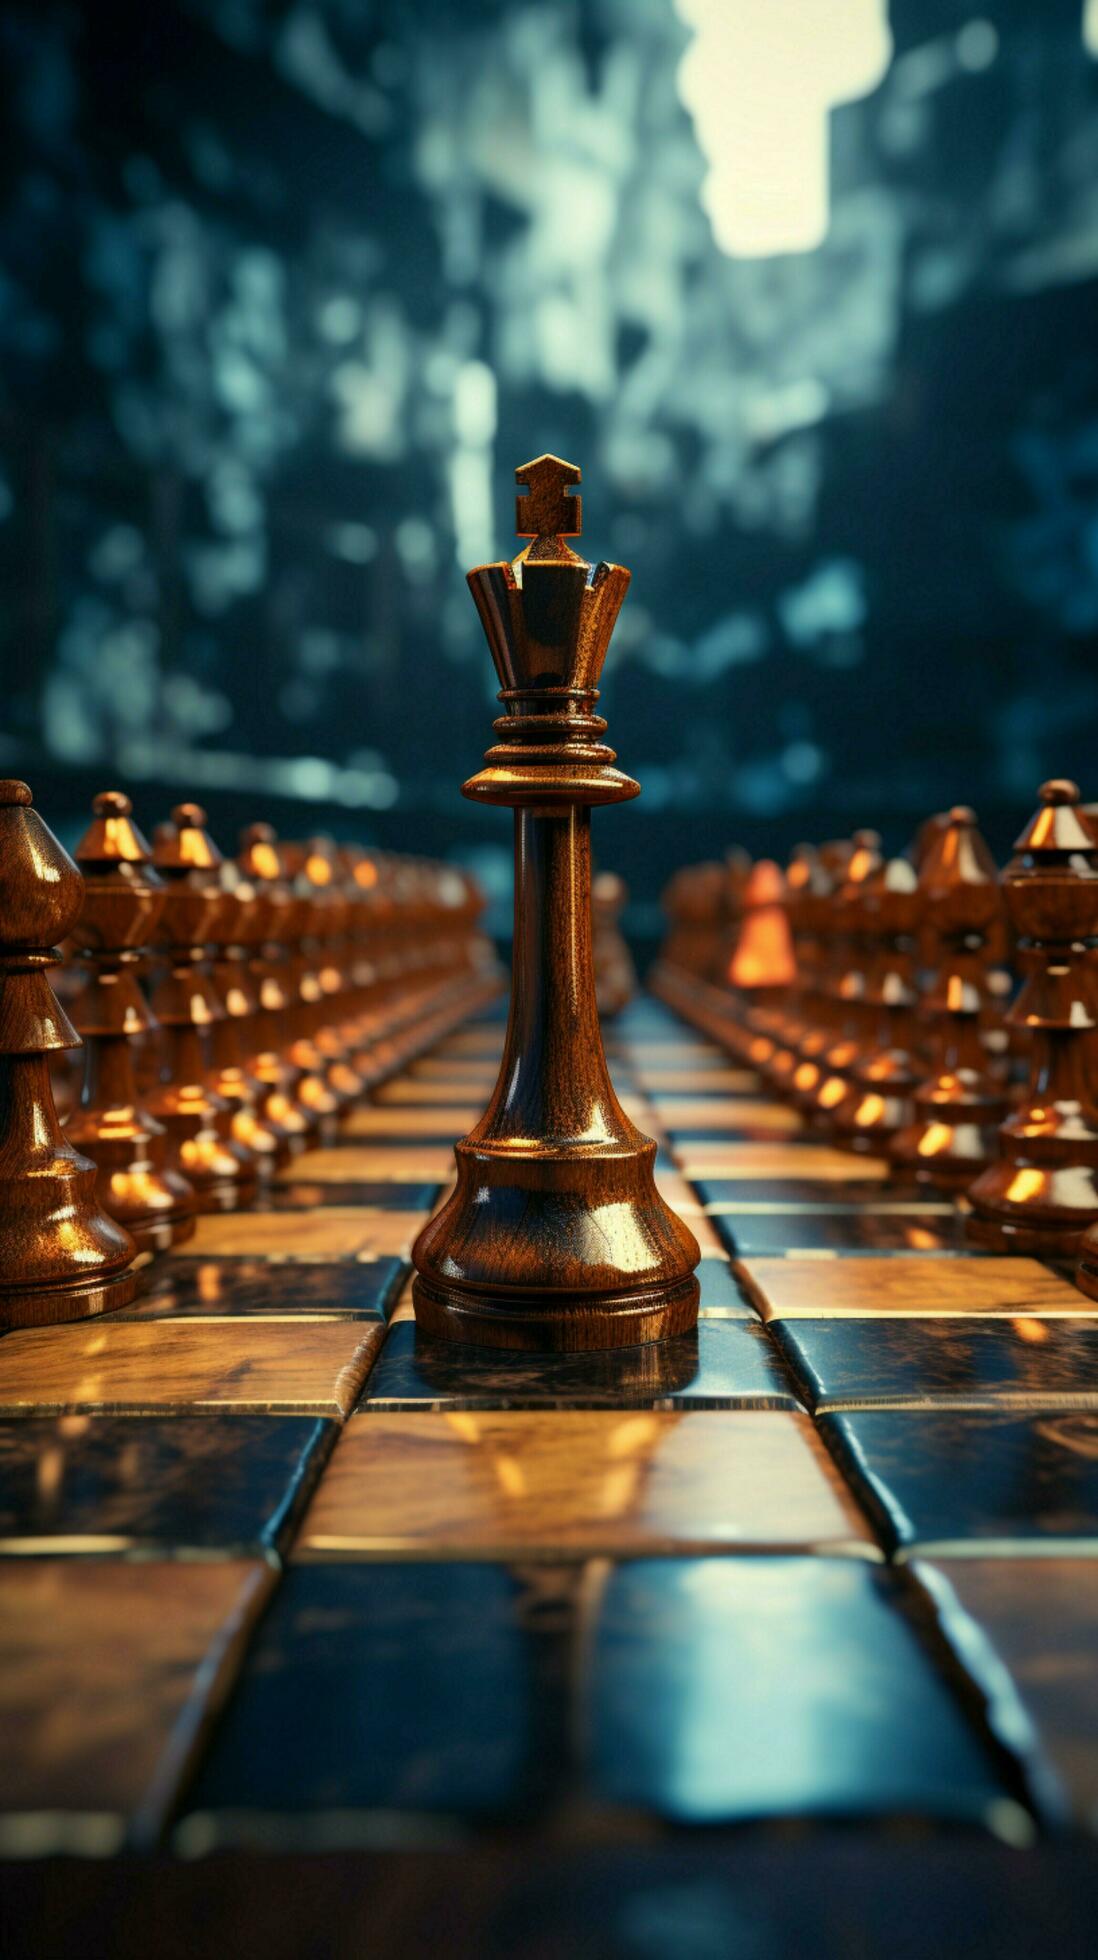 Strategic competition and creative ideas materialize in vintage hued chessboard aesthetics Vertical Mobile Wallpaper